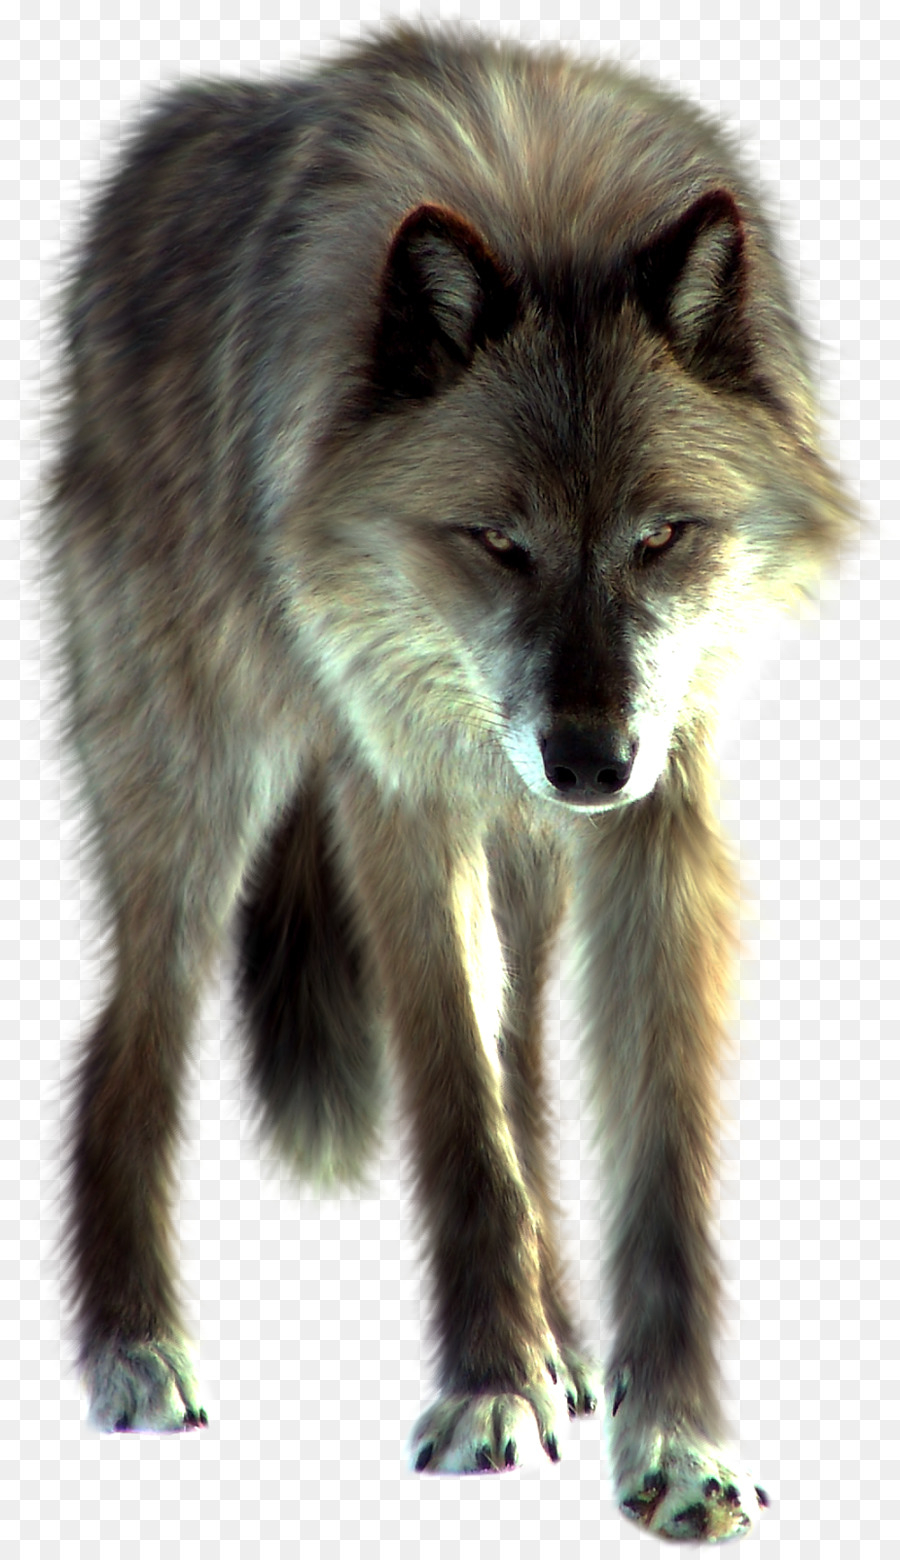 Arctic wolf Download Clip art - wolf png download - 925*1600 - Free ...